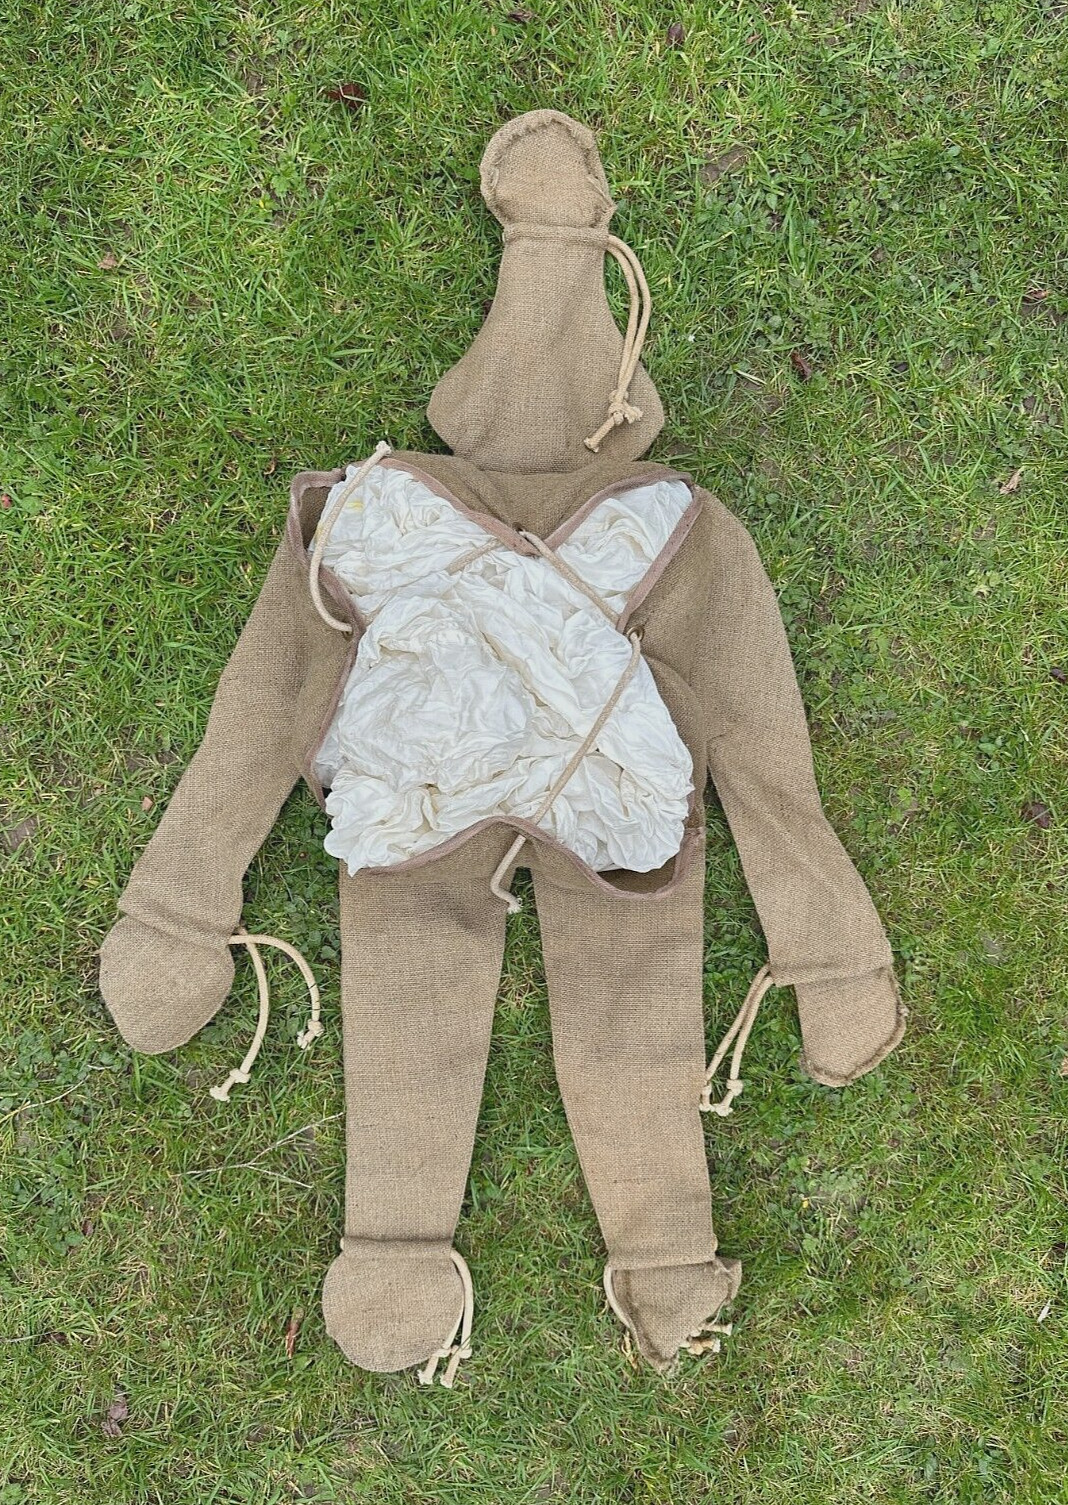 WW2 D DAY RUPERT PARA DUMMY NORMANDY 1944 + COMPLETE PARACHUTE, ROPE, TIES, RARE